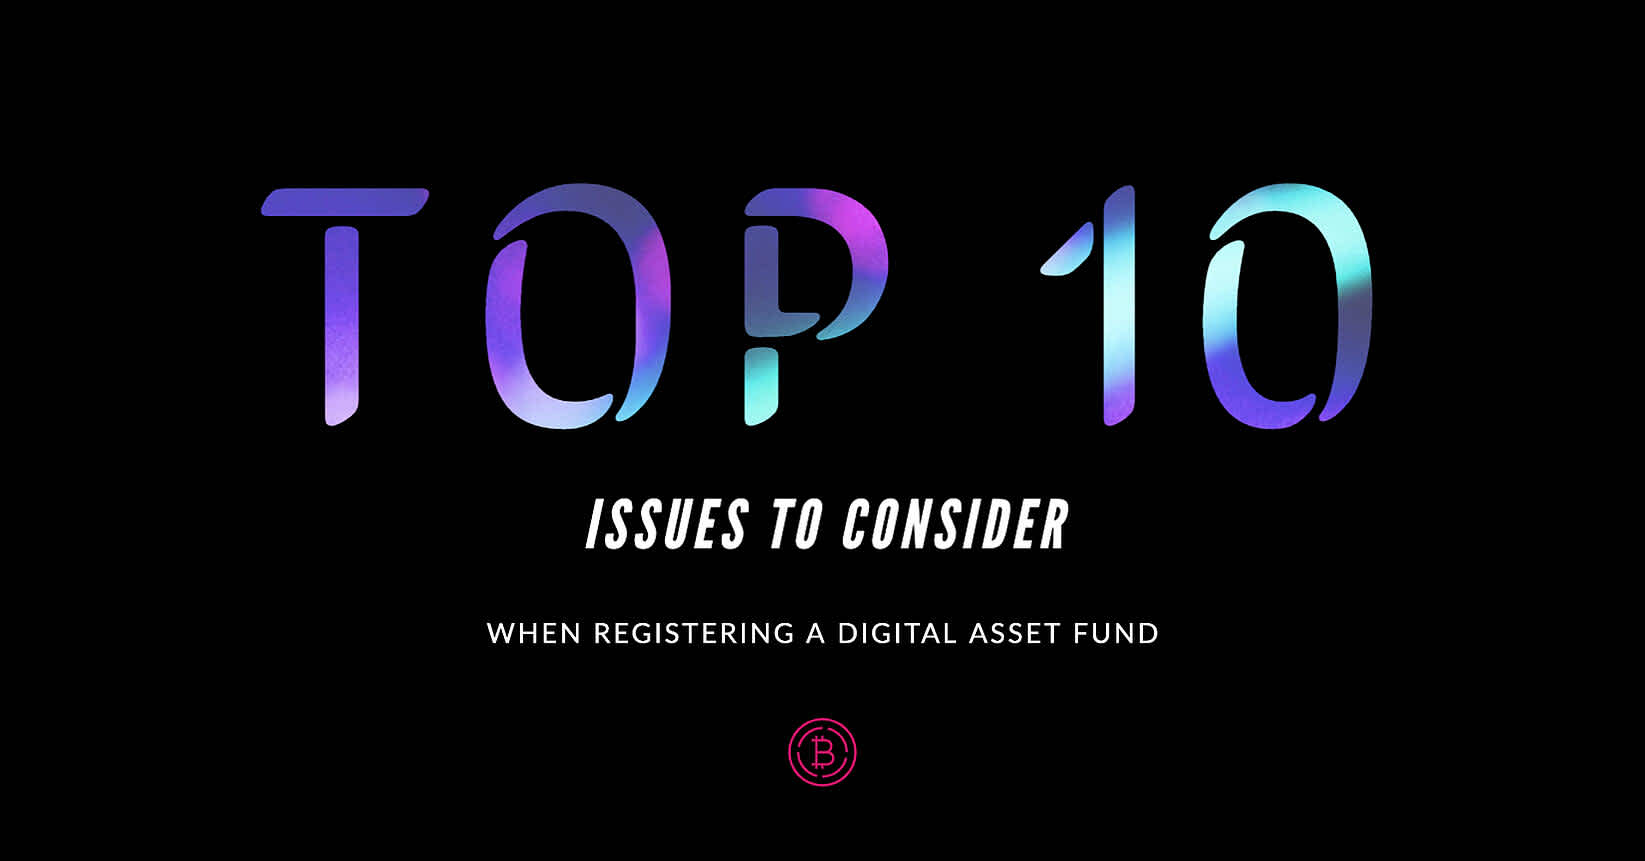 Top 10 Issues to Consider When Registering a Digital Asset Fund